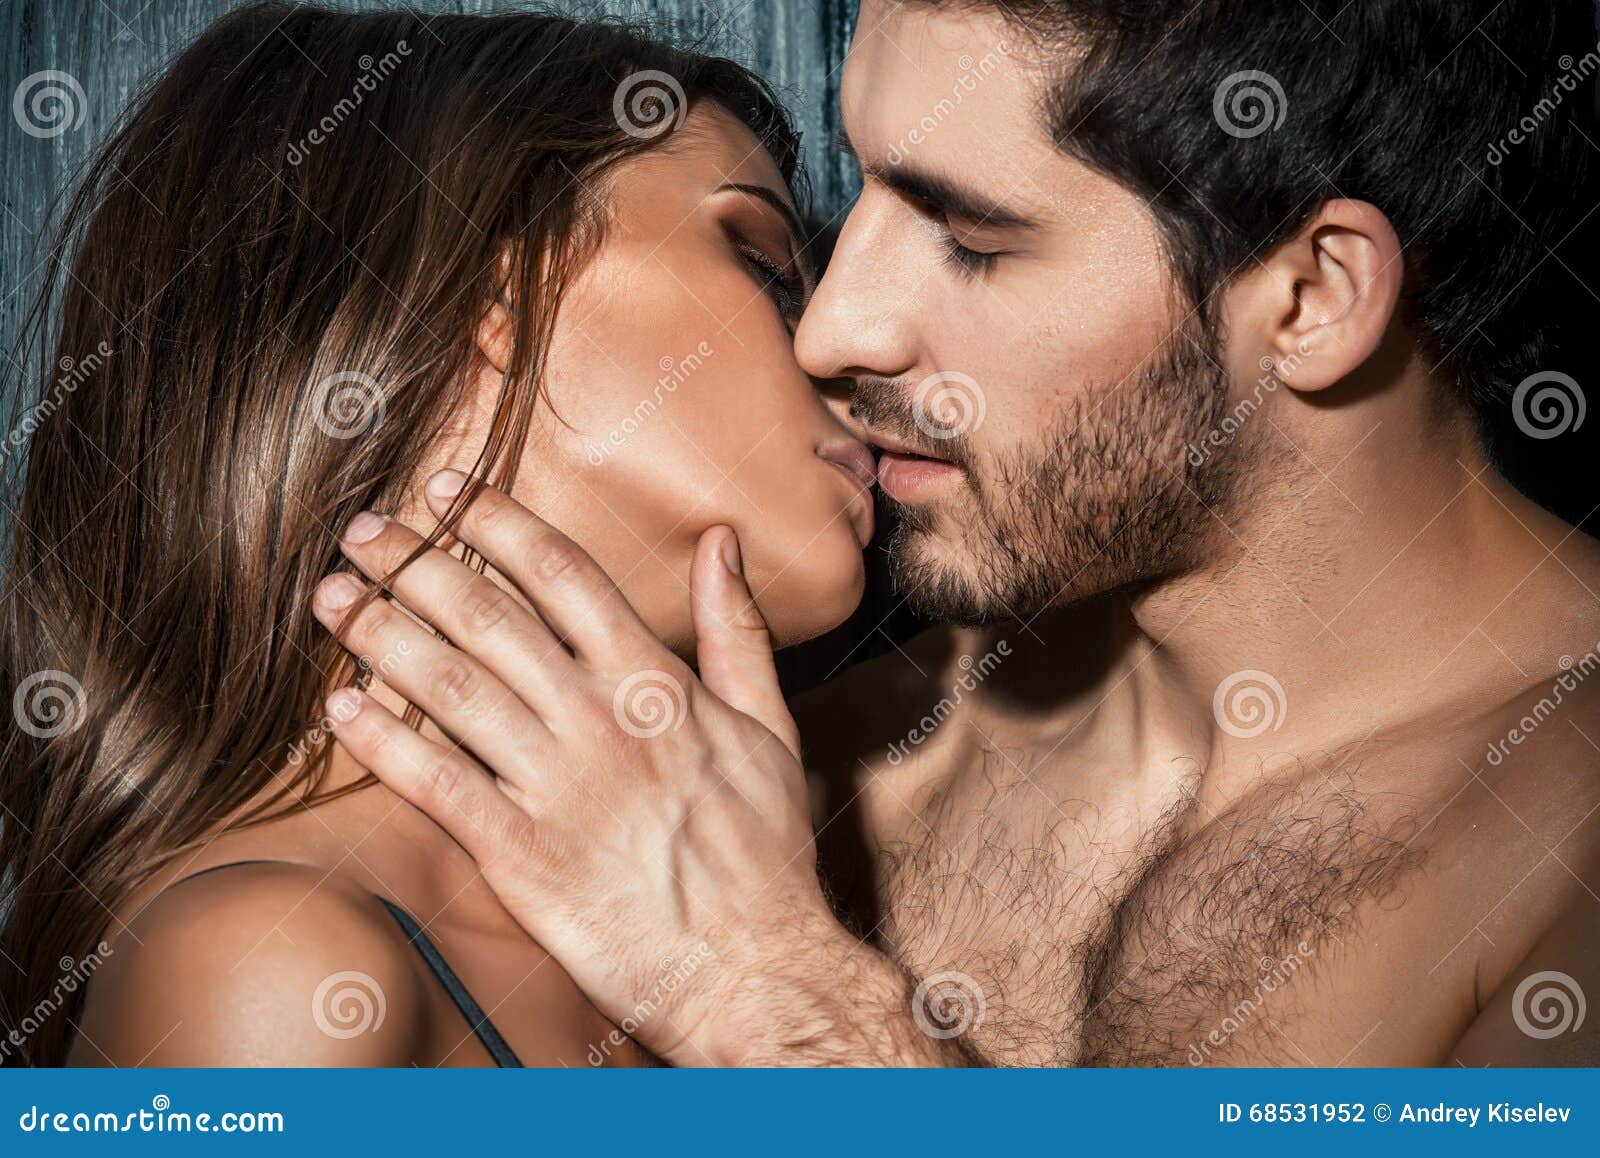 French kiss stock photo picture